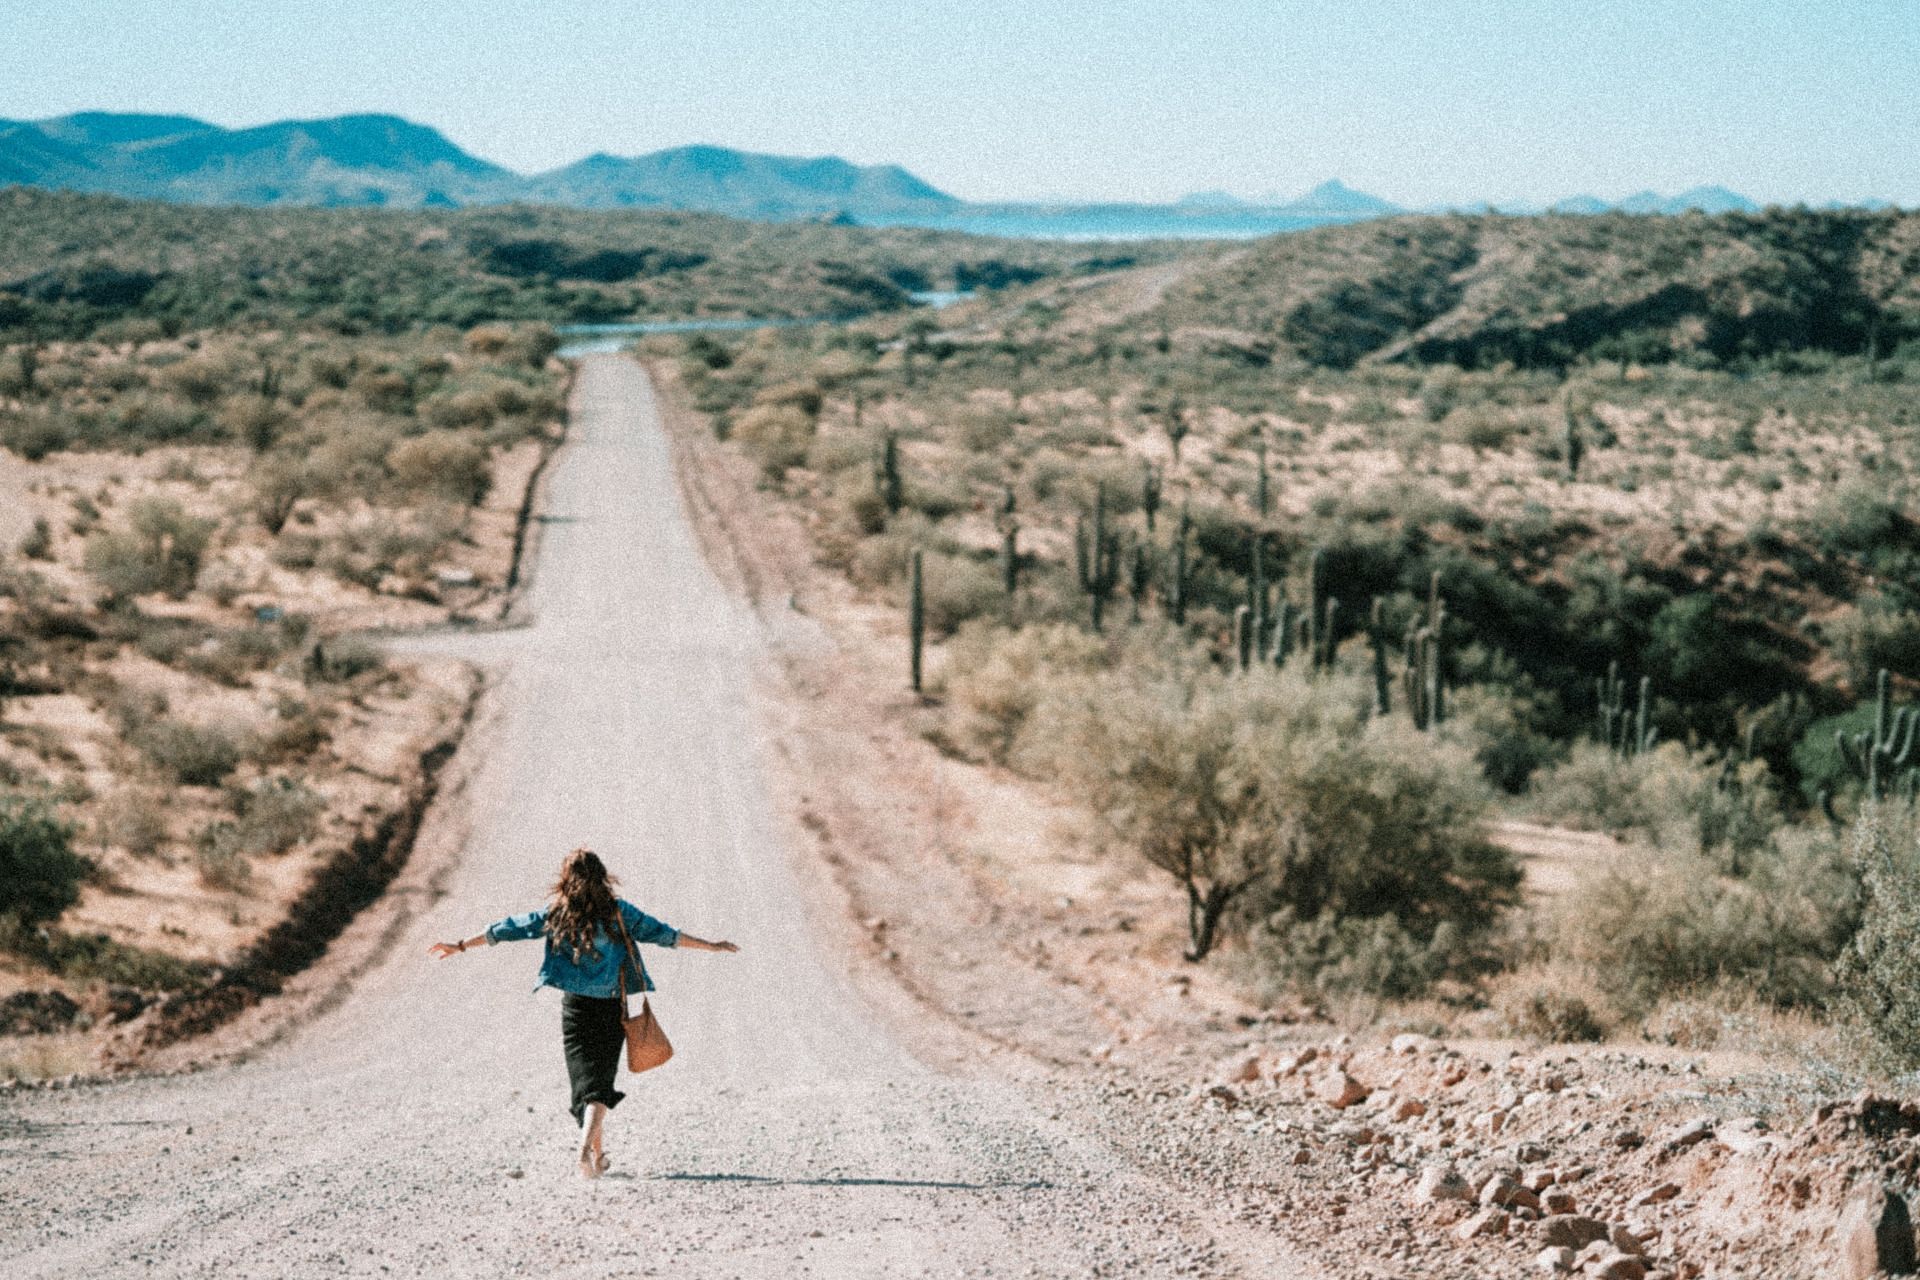 Walking outisde in nature uplifts your mood. (Image by Taryn Elliott / Pexels)